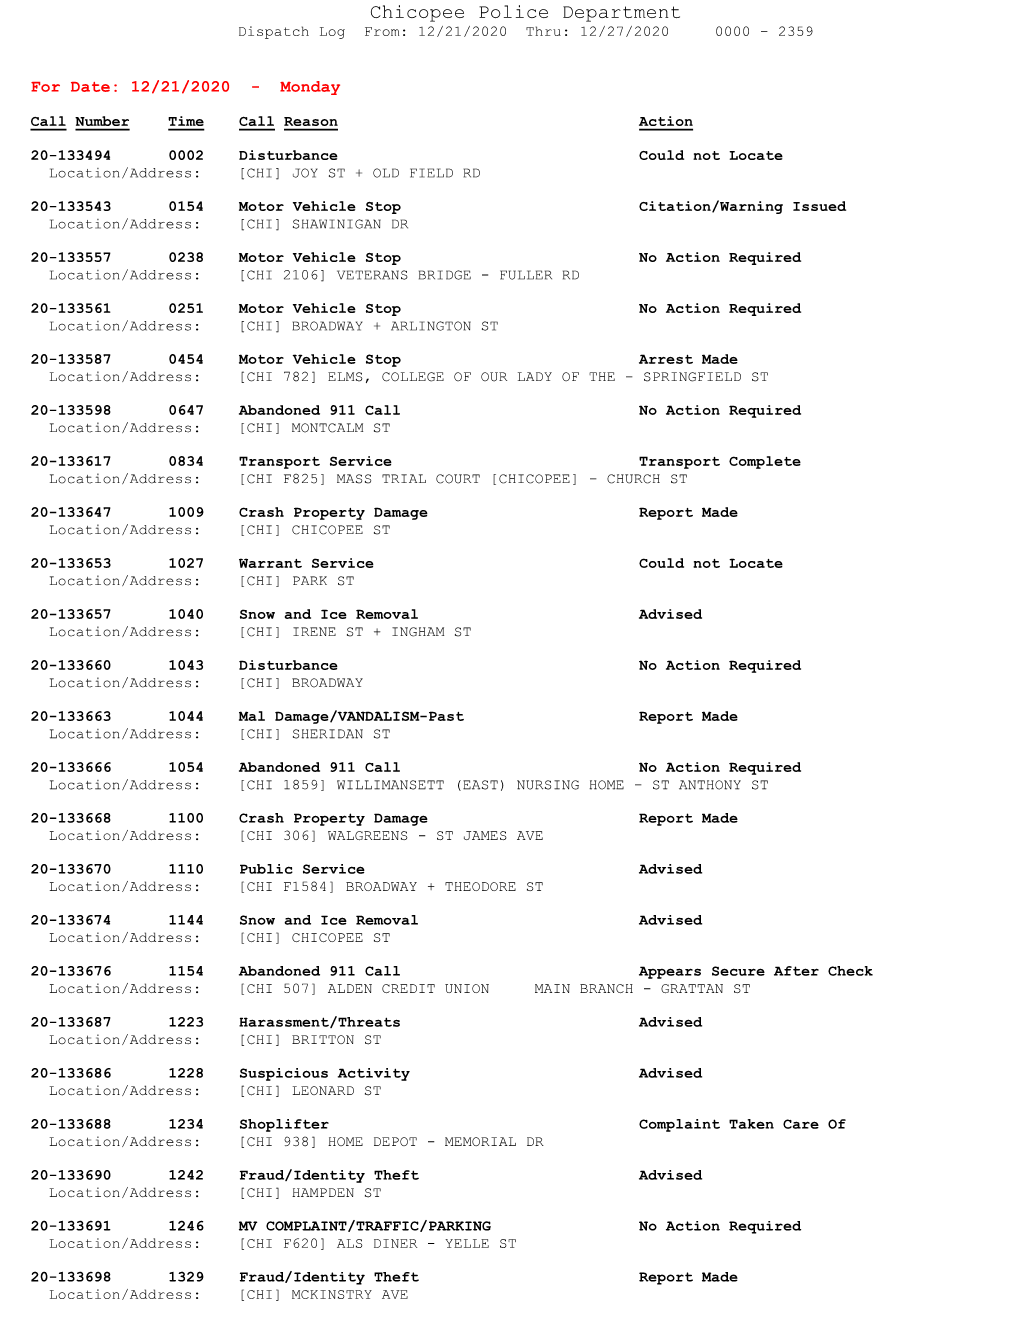 Chicopee Police Department Dispatch Log From: 12/21/2020 Thru: 12/27/2020 0000 - 2359